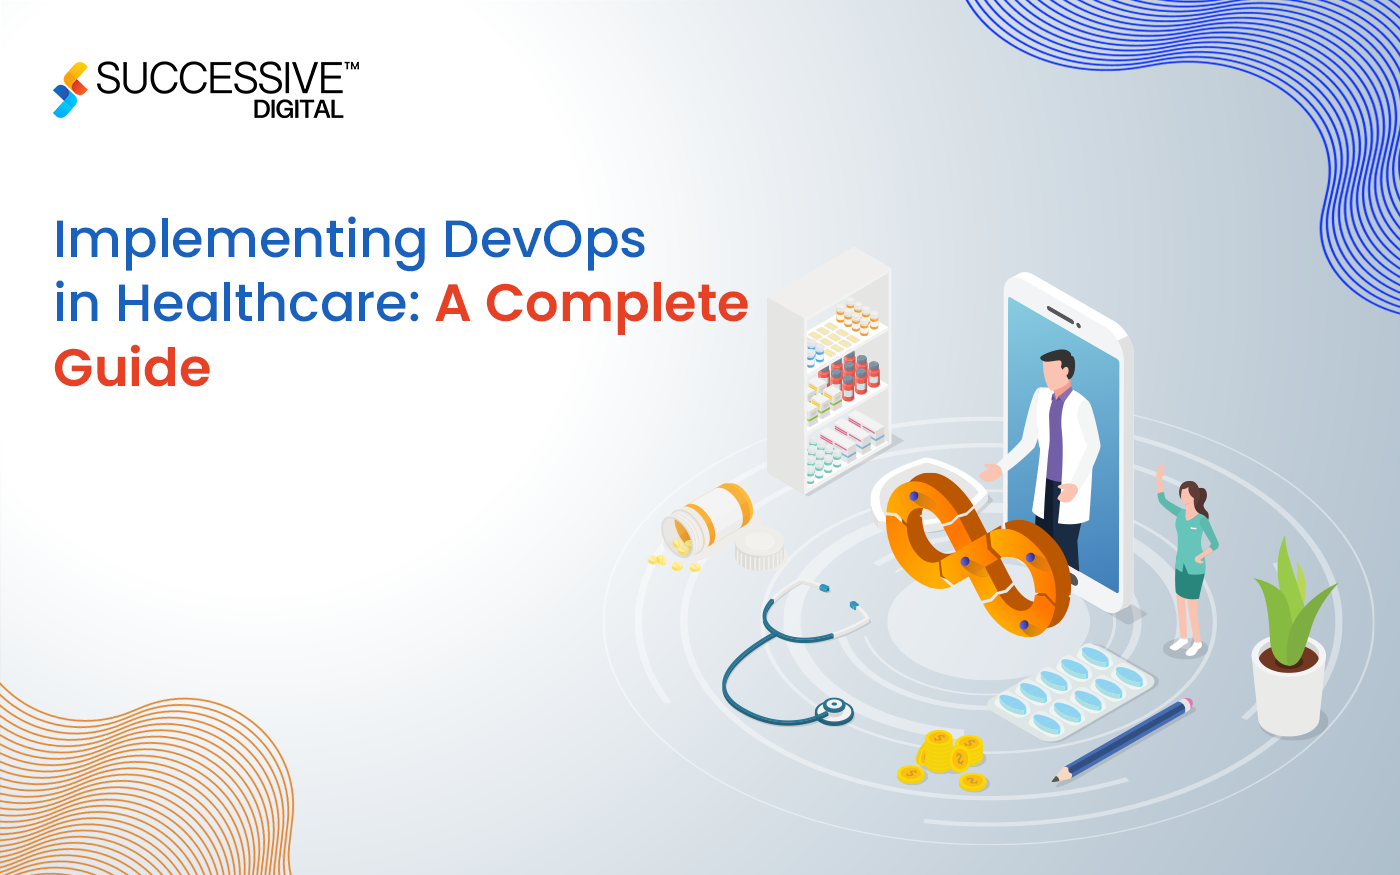 Implementing DevOps in Healthcare: A Complete Guide